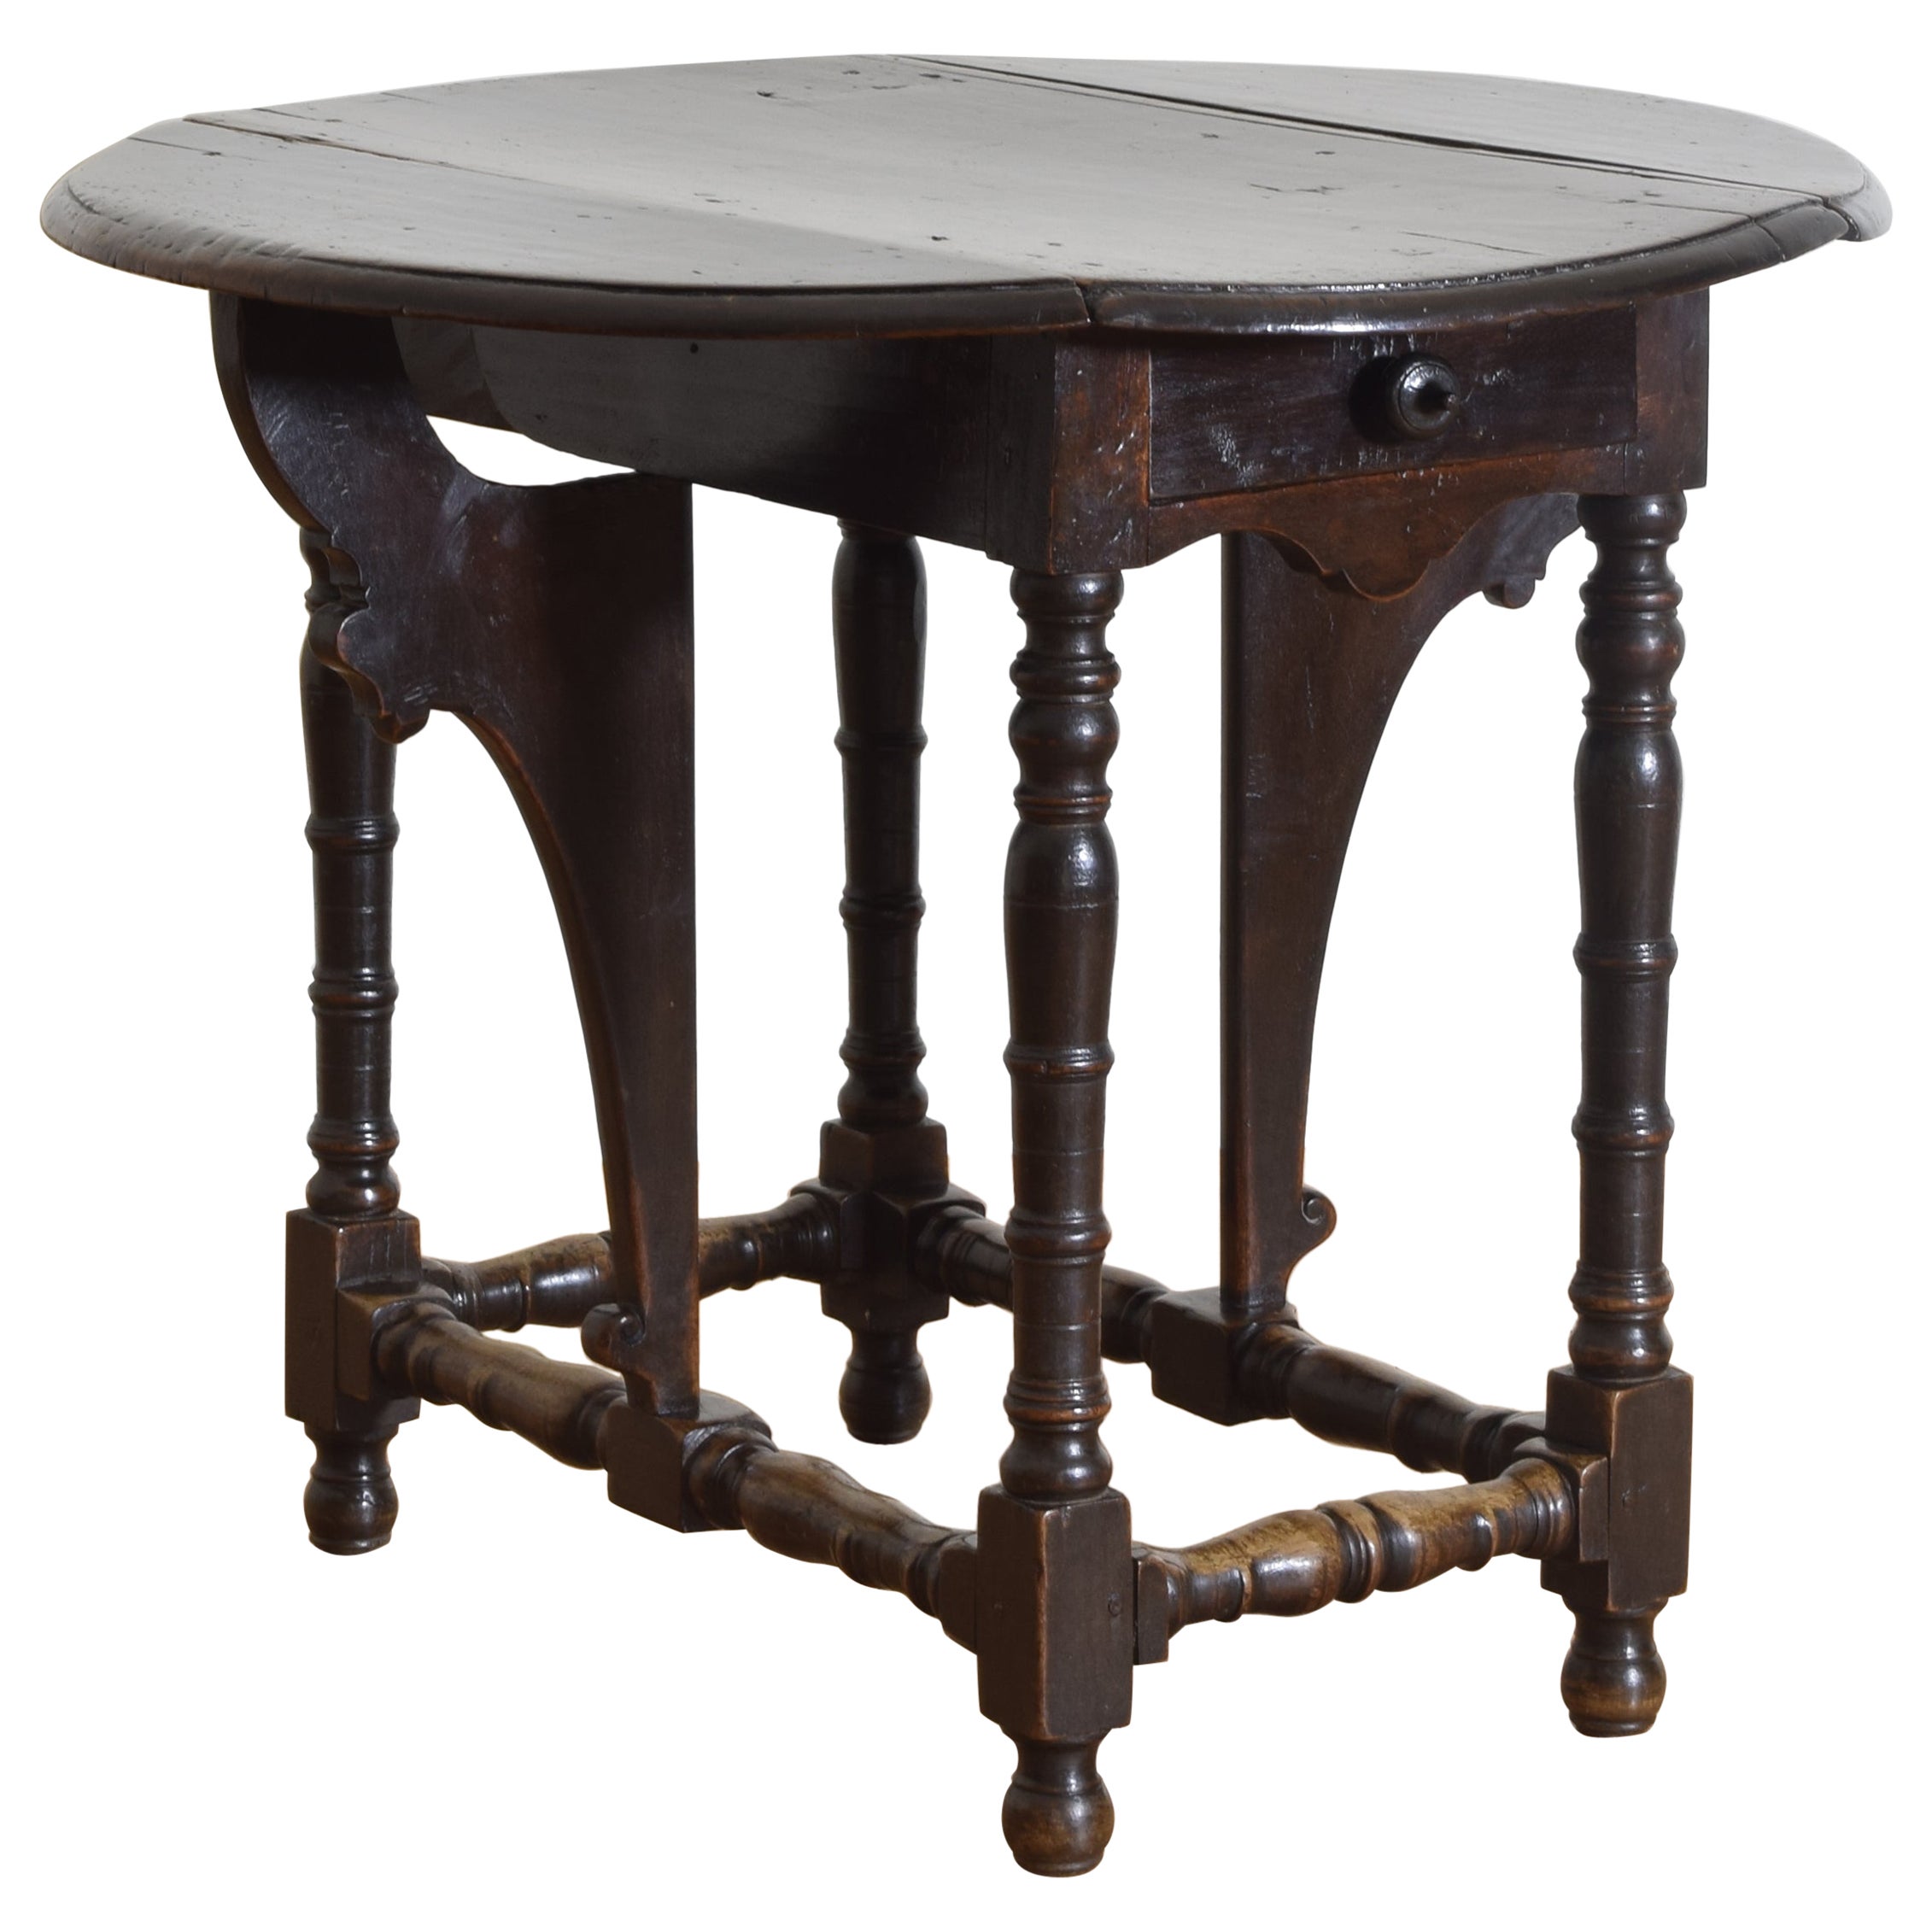 Italian Louis XIV Period Walnut Drop Leaf 1-Drawer Table, early 18th century For Sale